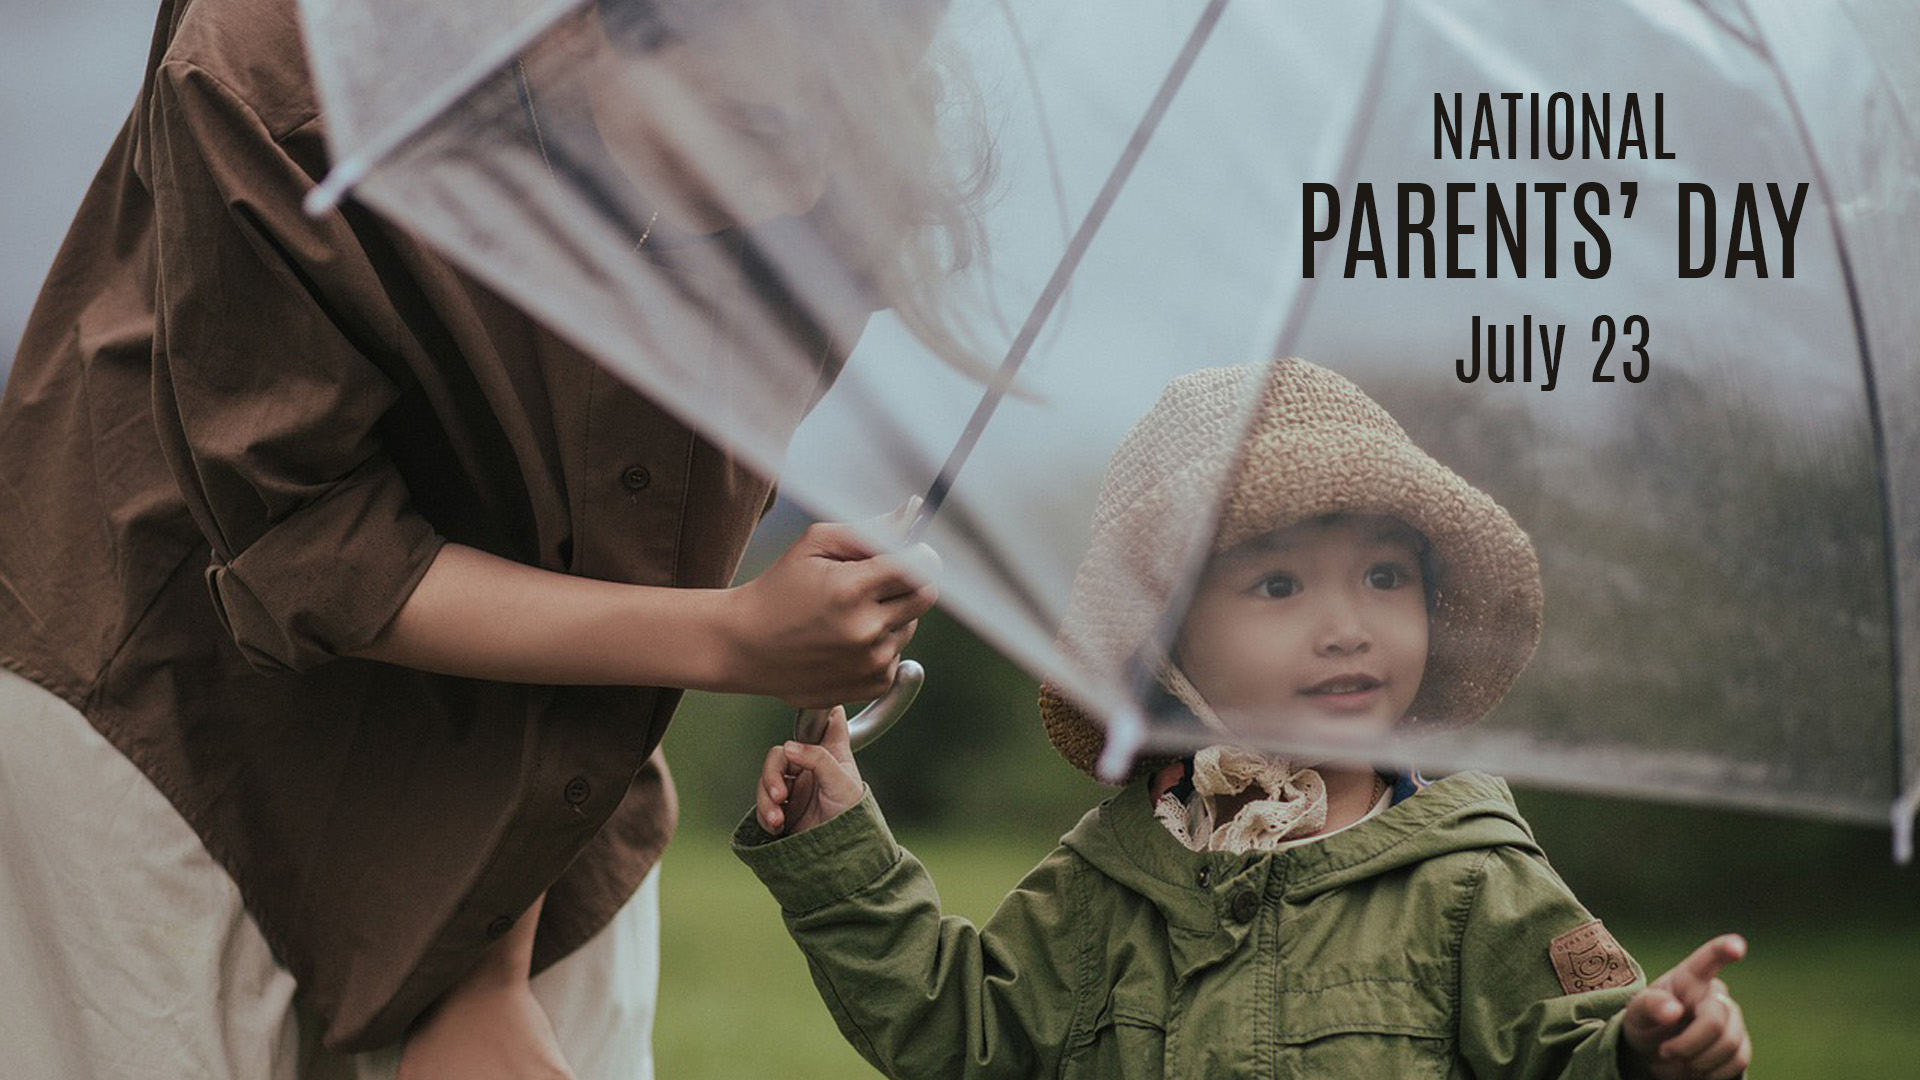 A image of a person bending over holding an umbrella over a child who is in a jacket with a hat. The child is pointing to the right. In the top right side of the image there is text that reads National Parents' Day July 23